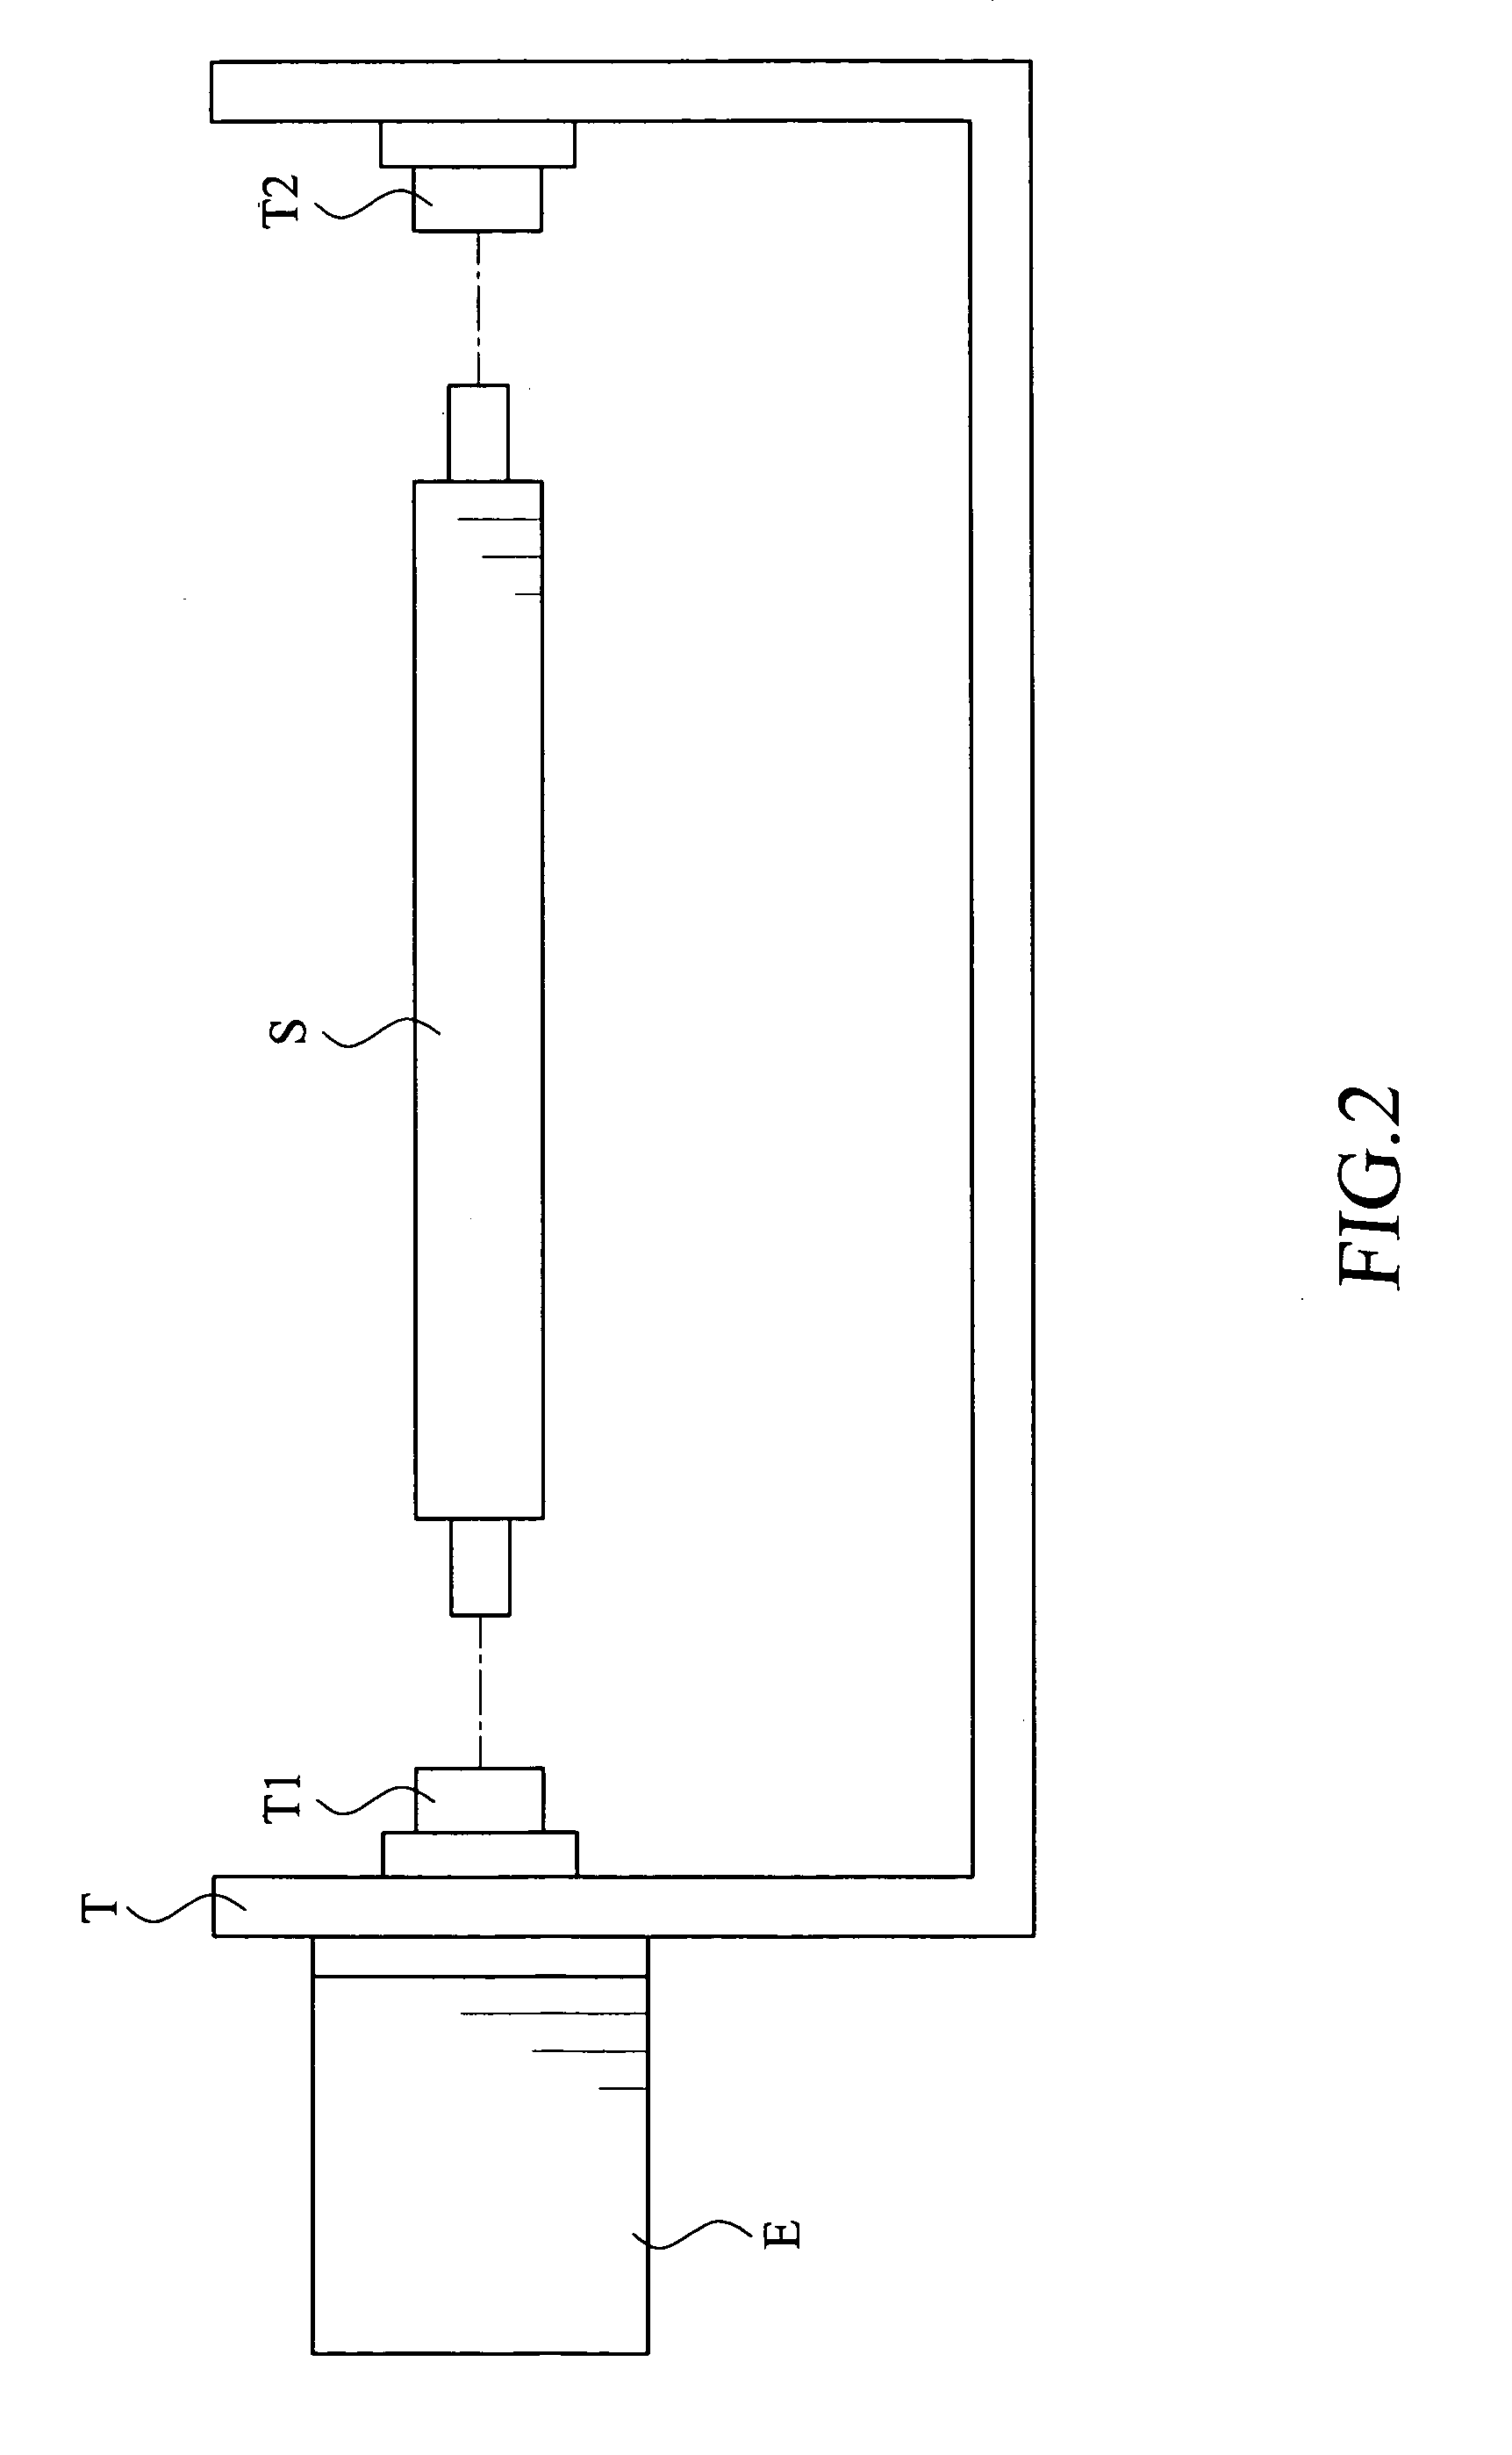 Method for manufacturing light set with surface mounted light emitting components